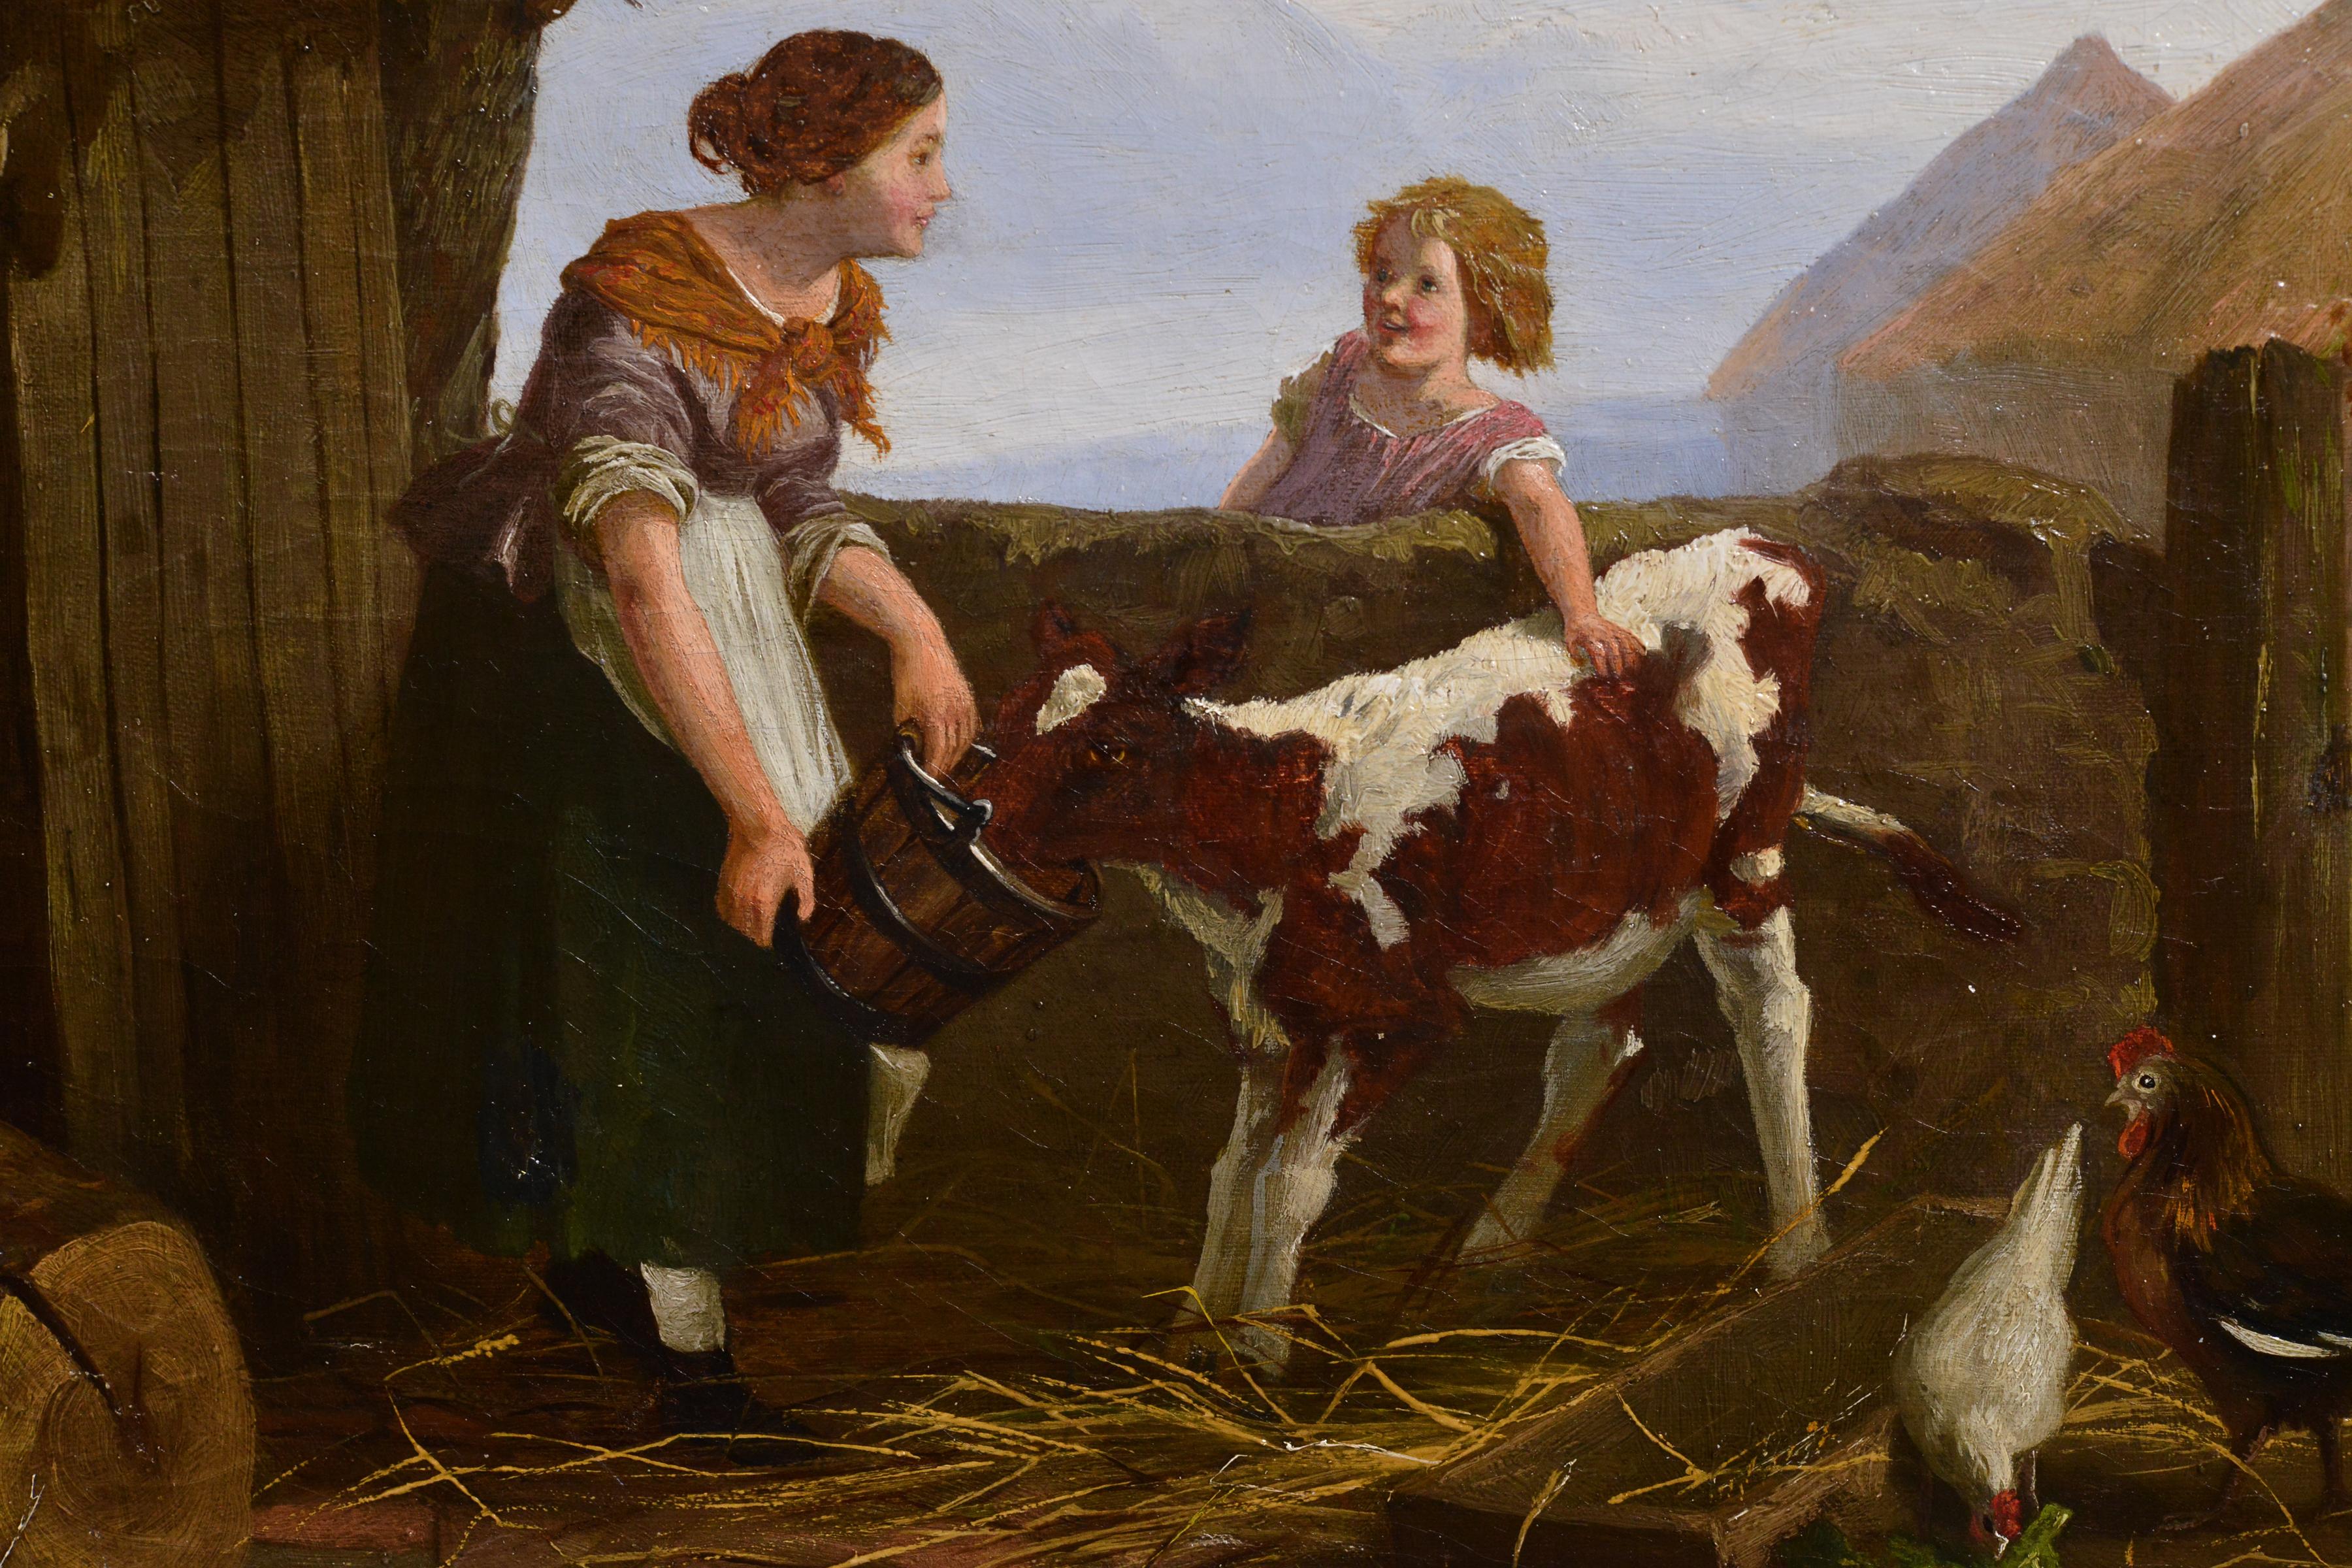 As we gaze upon this artwork, we are immediately struck by the warmth and tenderness exuding from the scene. The woman, with a gentle smile on her face, carefully feeds the pet calf, while the redhead girl, her eyes sparkling with excitement,